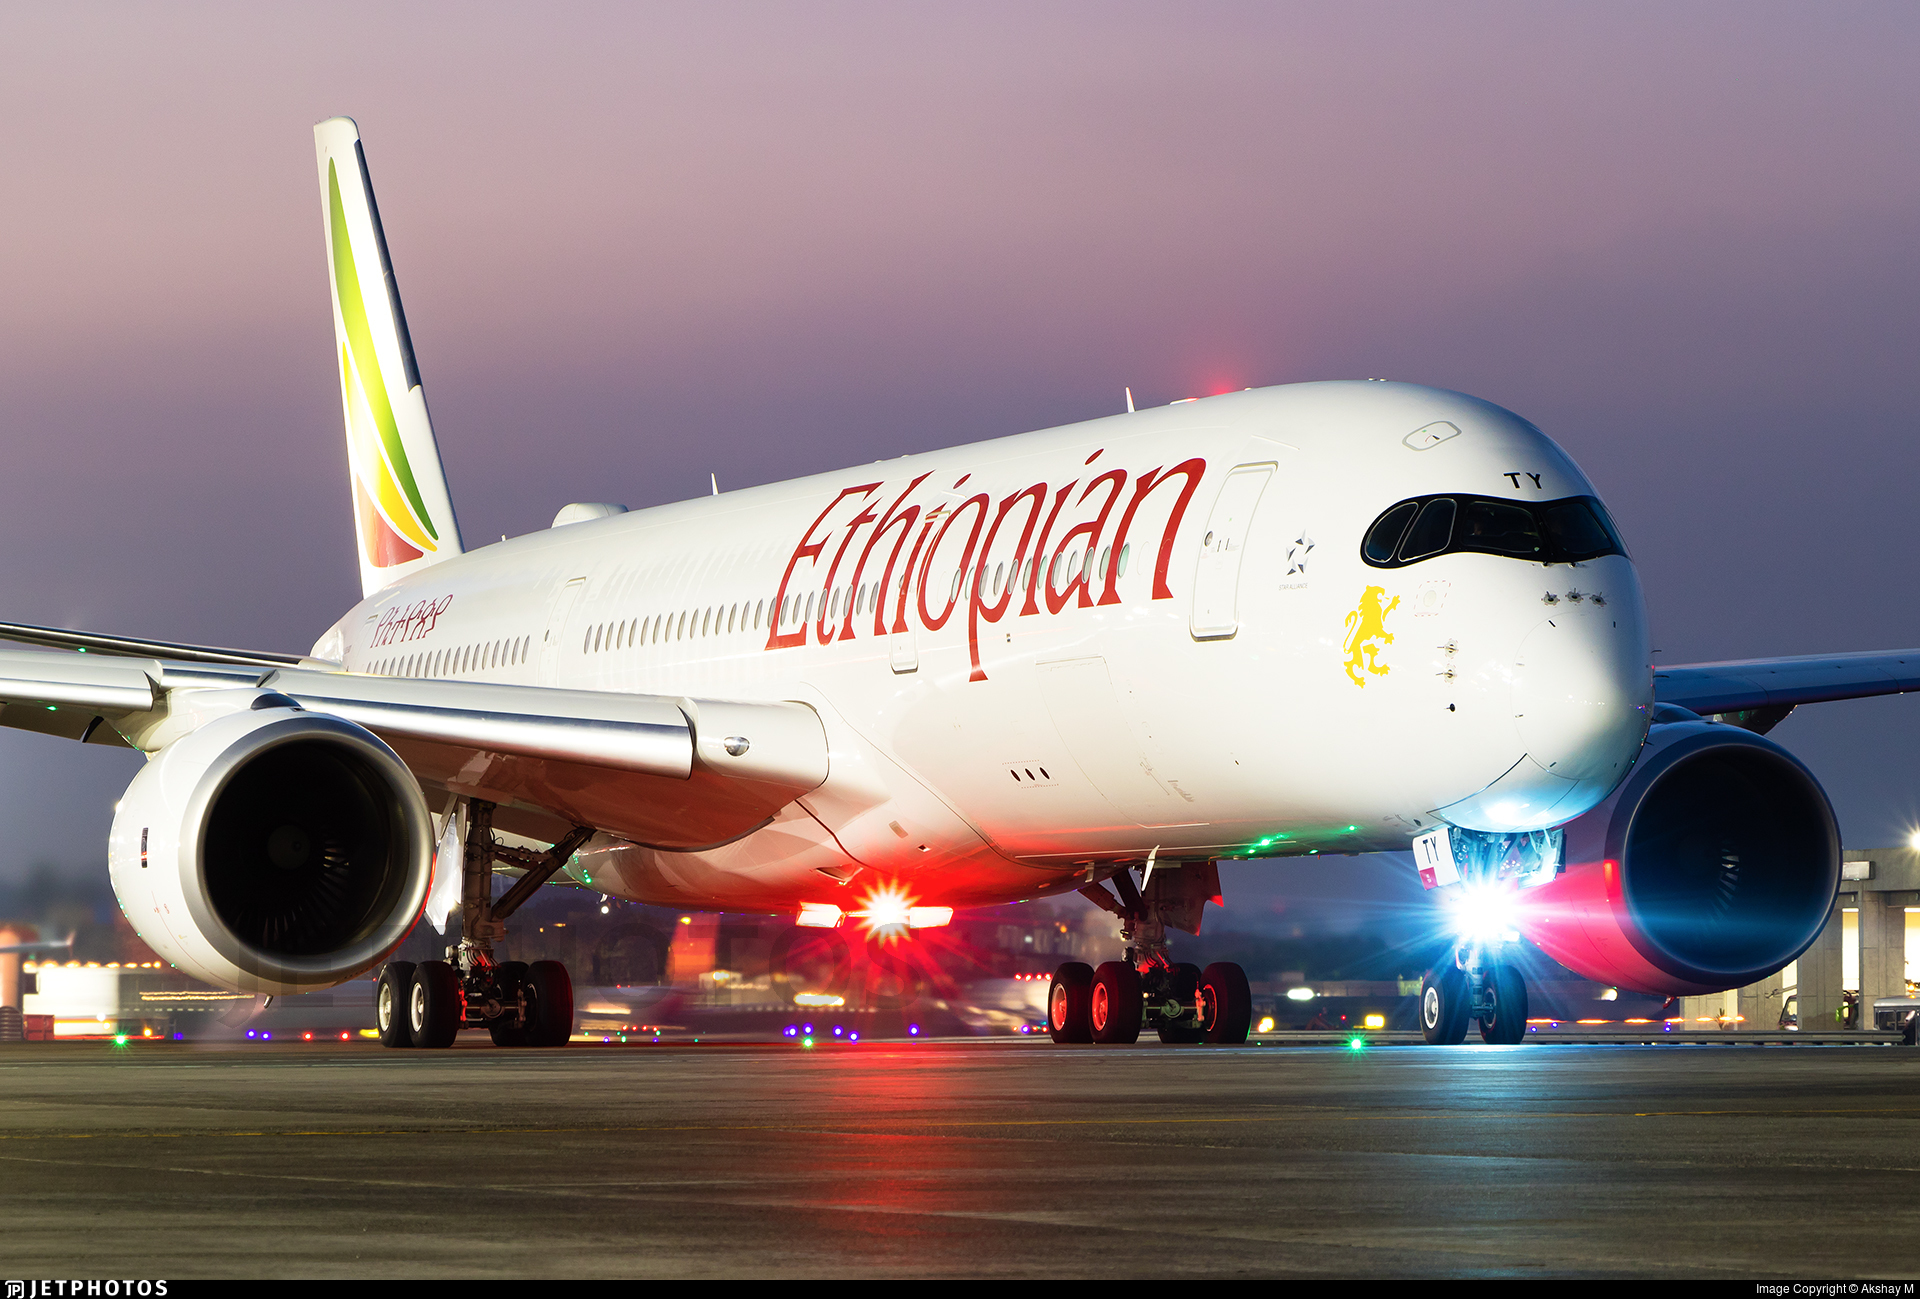 Ethiopian Airlines Removes Crew Who Allegedly Fell Asleep On Air, Pending Further Investigation